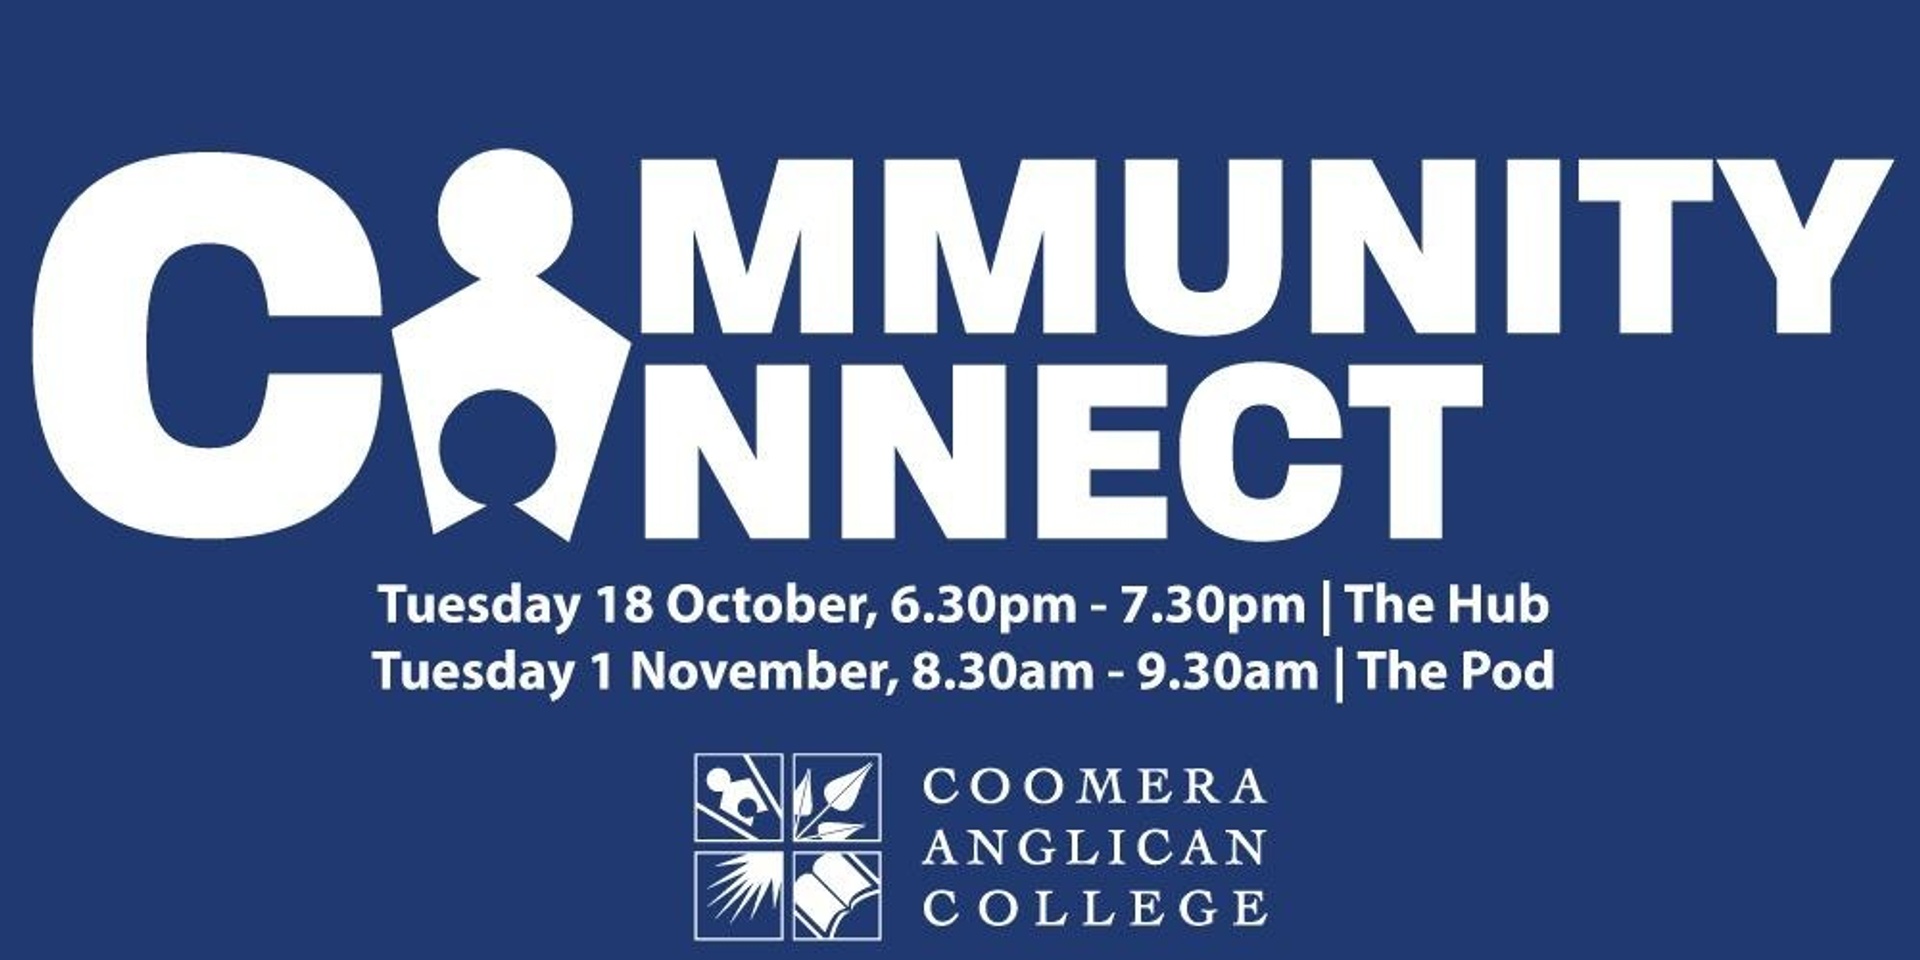 Community Connect - Tuesday 1 November